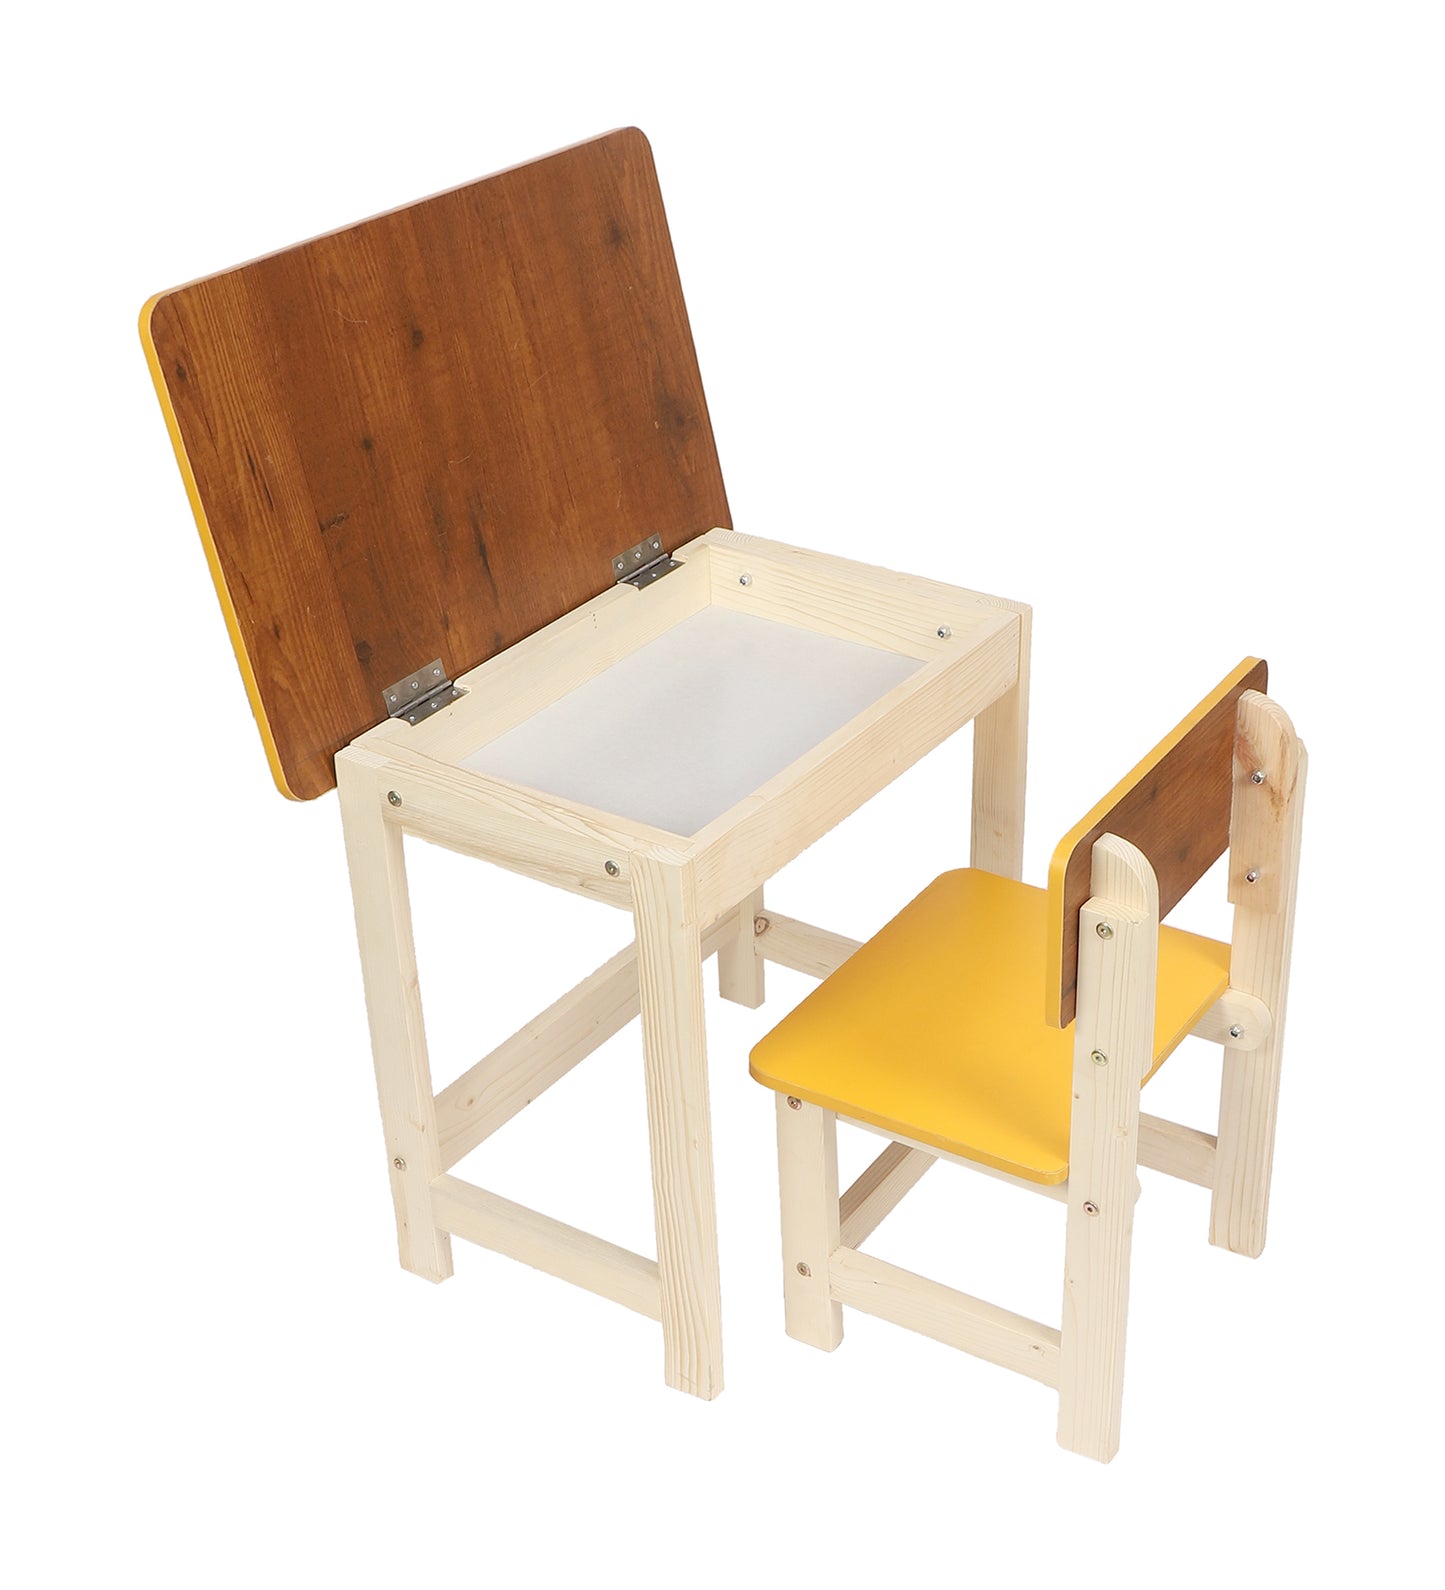 Wooden Table Chair Set Yellow(3-6 yrs)